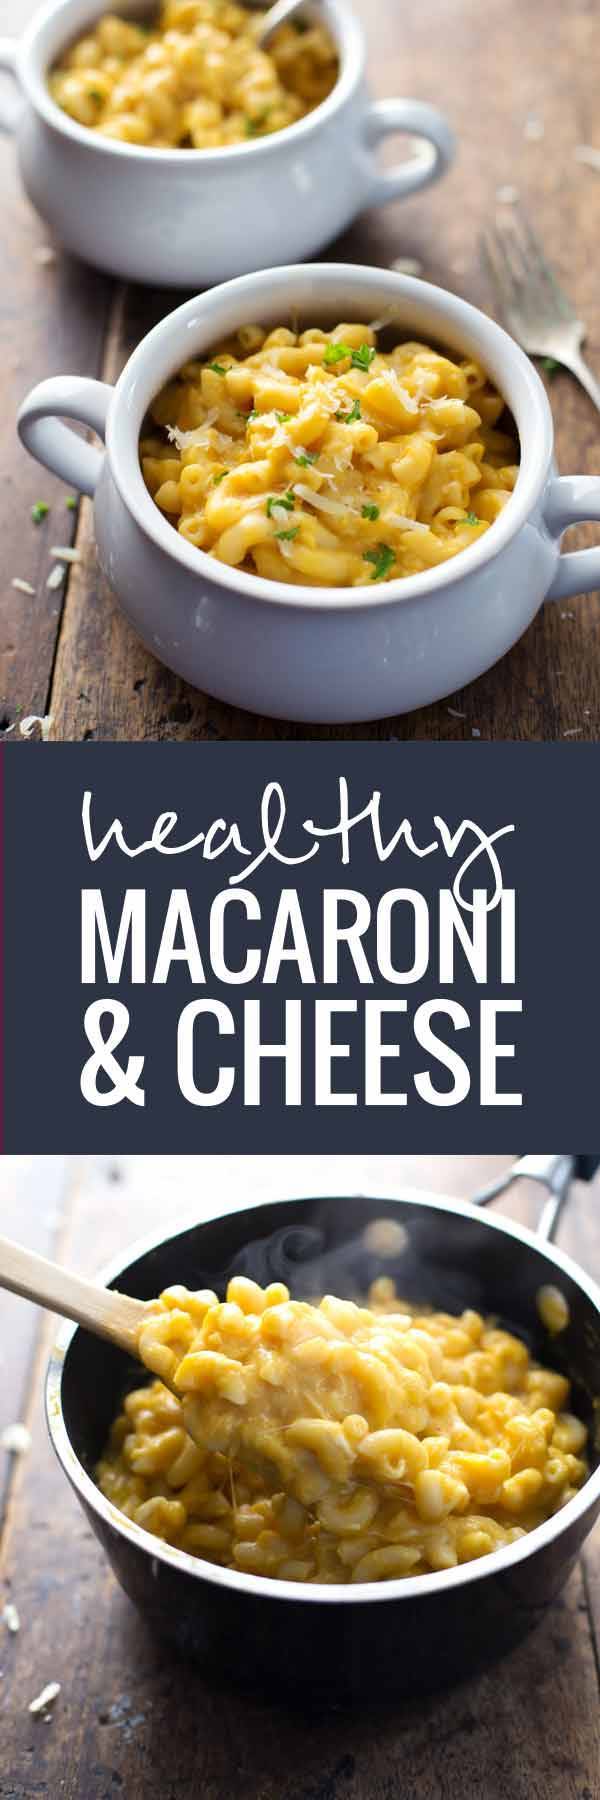 Healthy Mac and Cheese - A classic dish made with butternut squash for a healthy twist! Full of cheese and flavor | pinchofyum.com